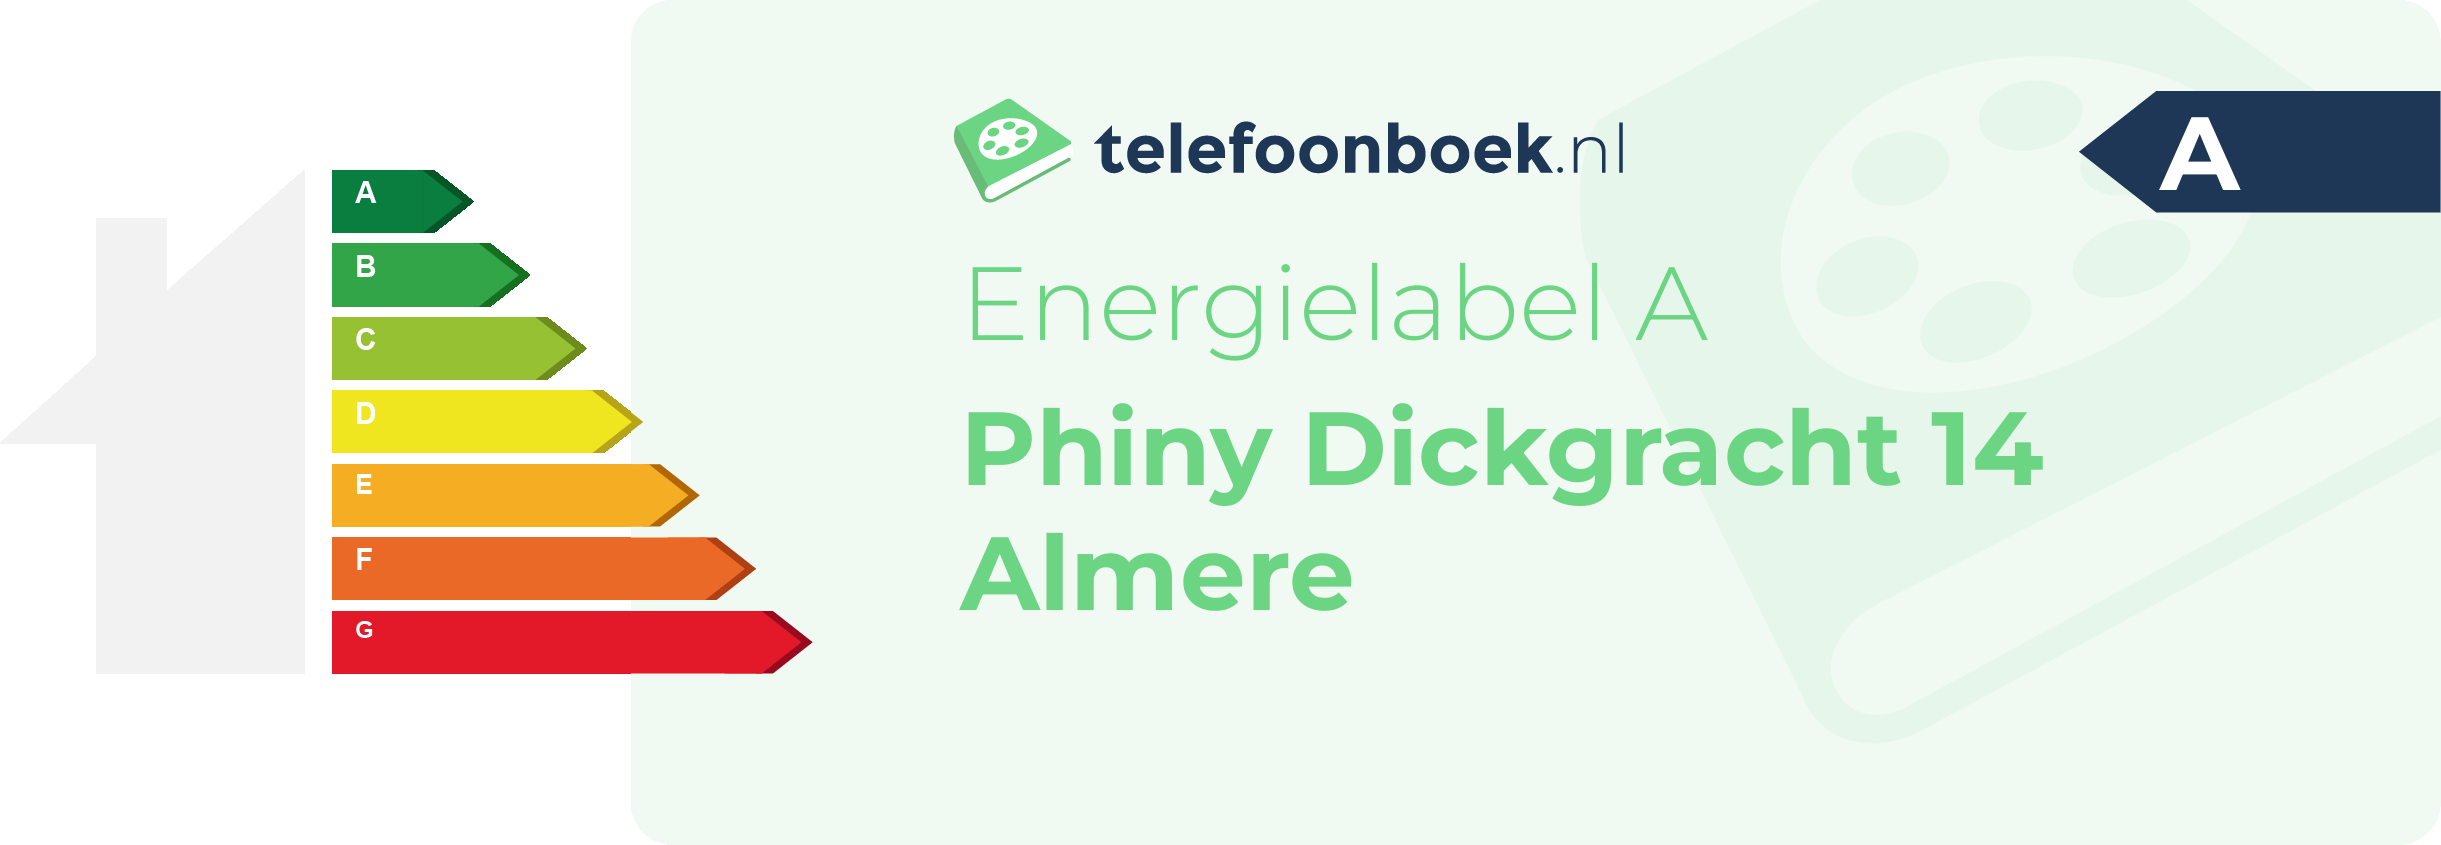 Energielabel Phiny Dickgracht 14 Almere